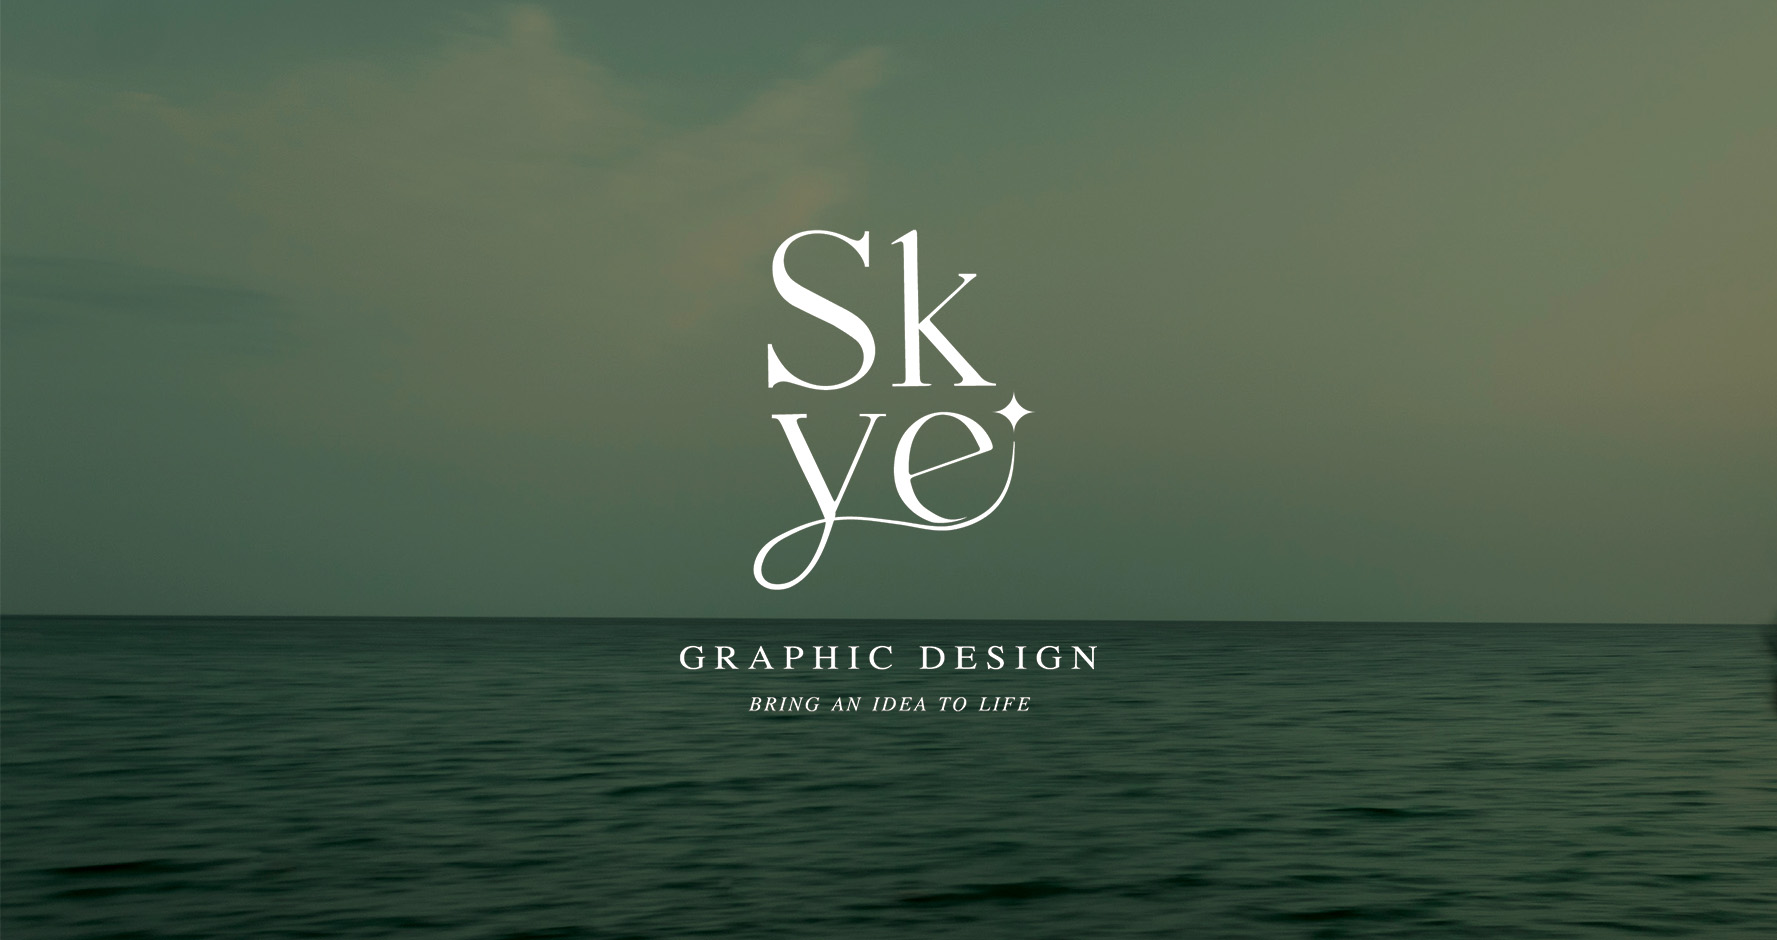 Hero banner with logo and tagline of Skye Designs overlayed on an image of the green tinted green sea and sky.